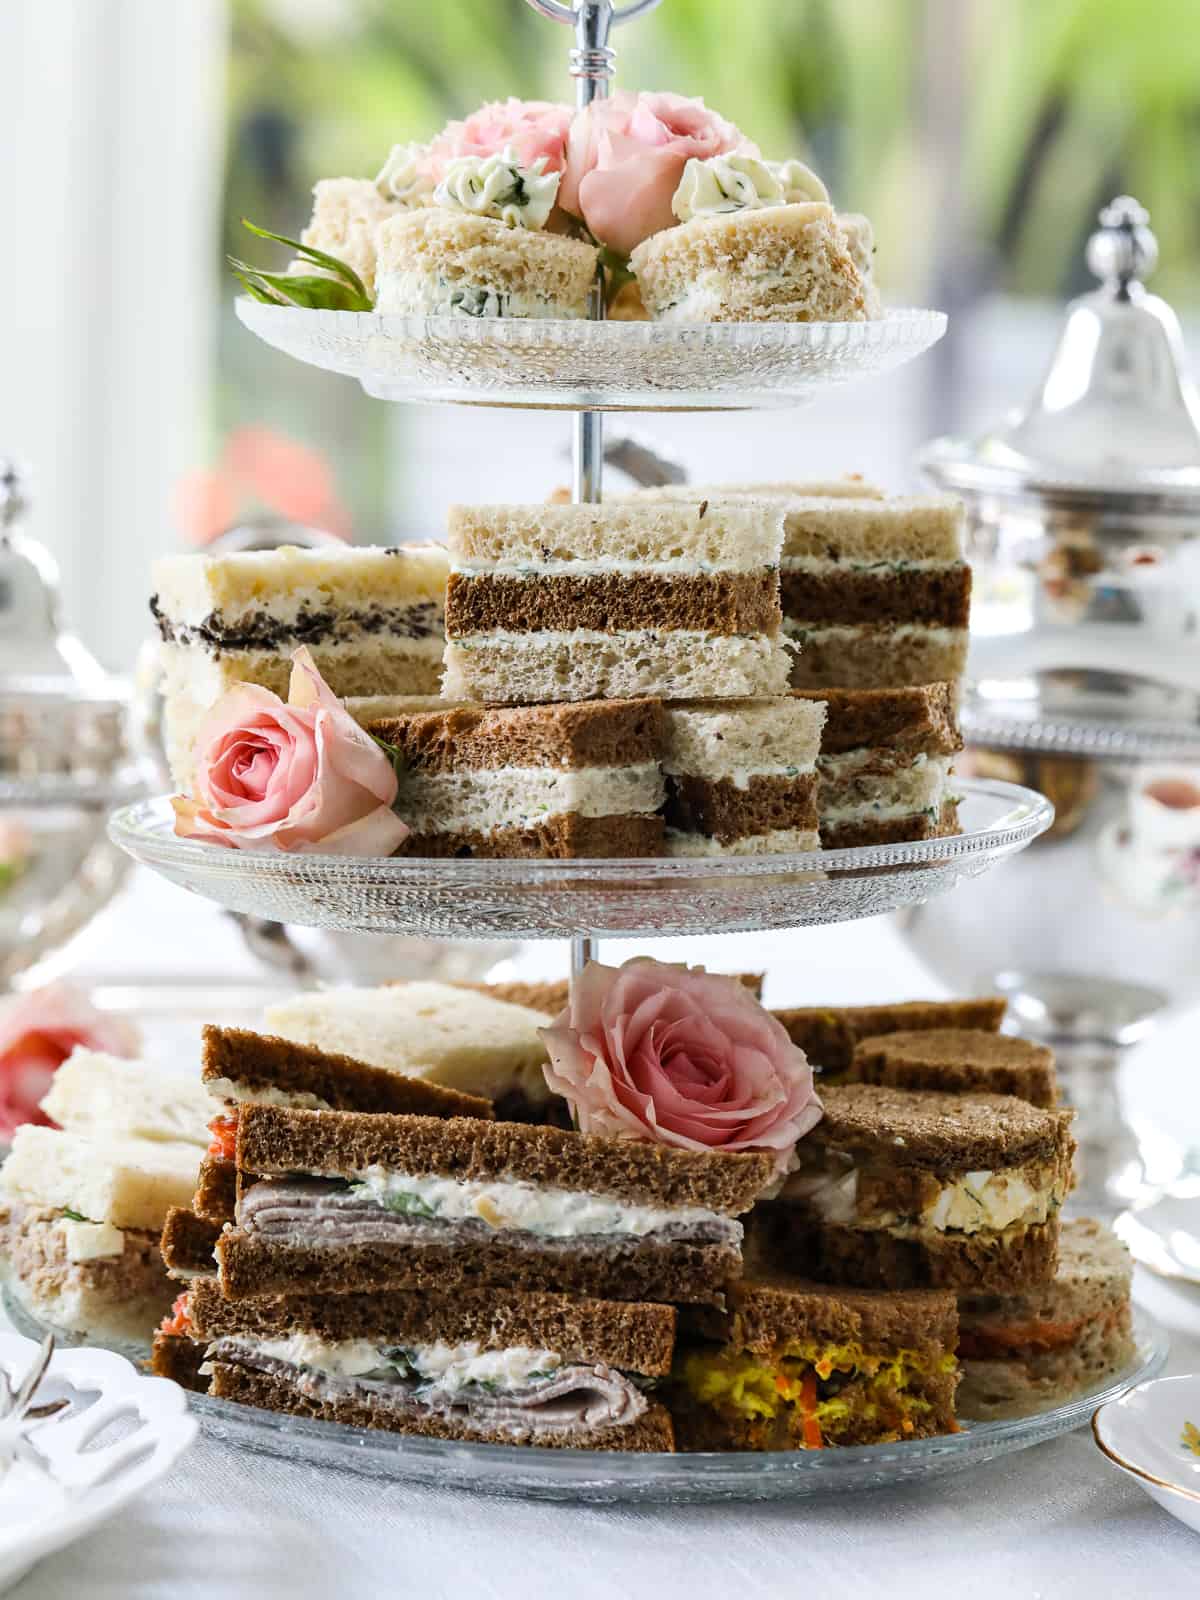 Side view of a triple glass tiered tray with stacks of tea sandwiches sliced in different shapes and colors of white and dark bread.